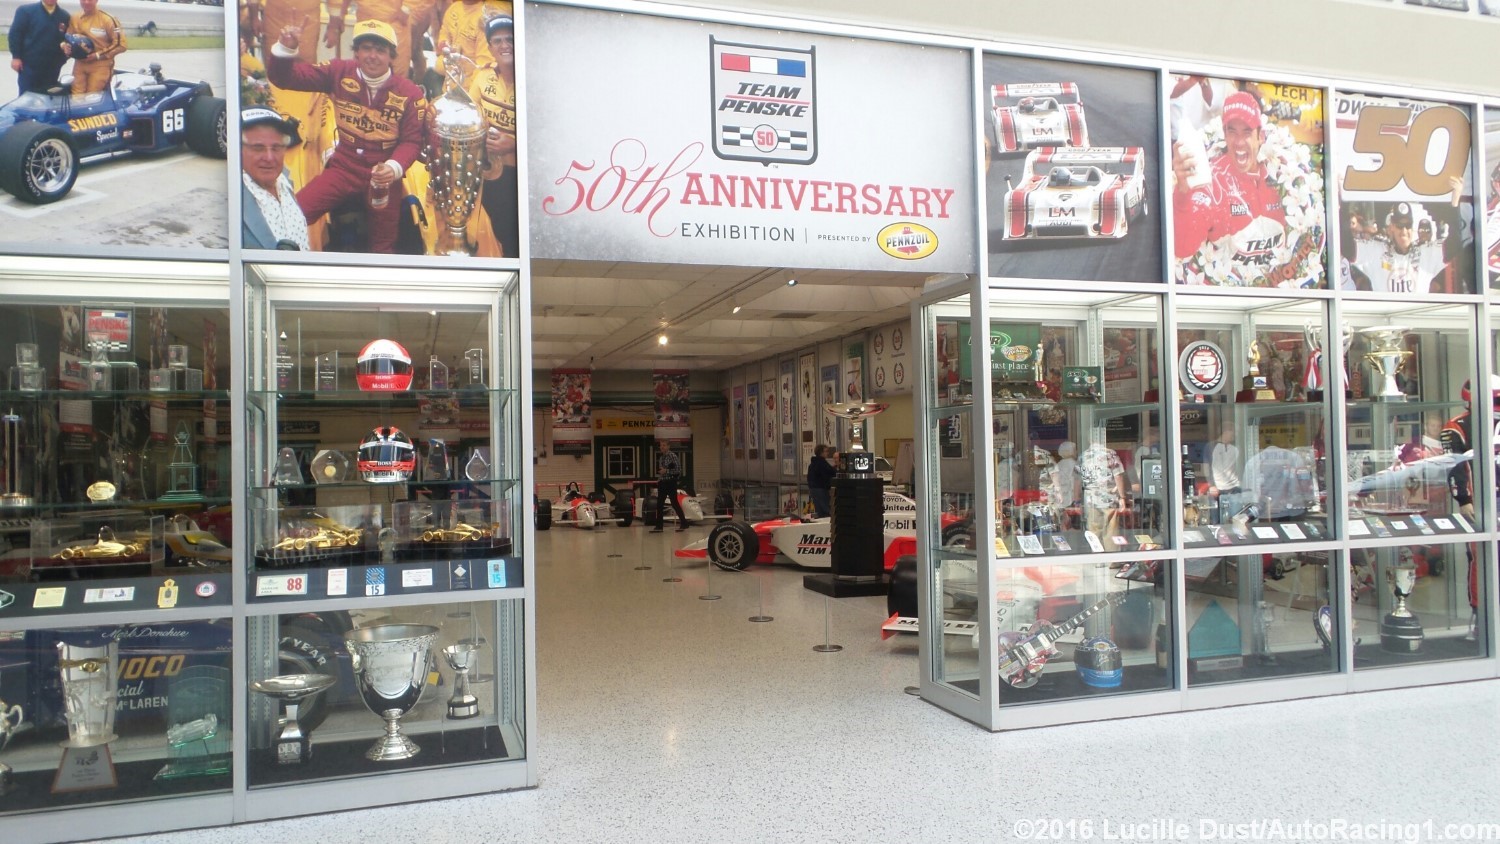 Penske display at the Speedway Museum